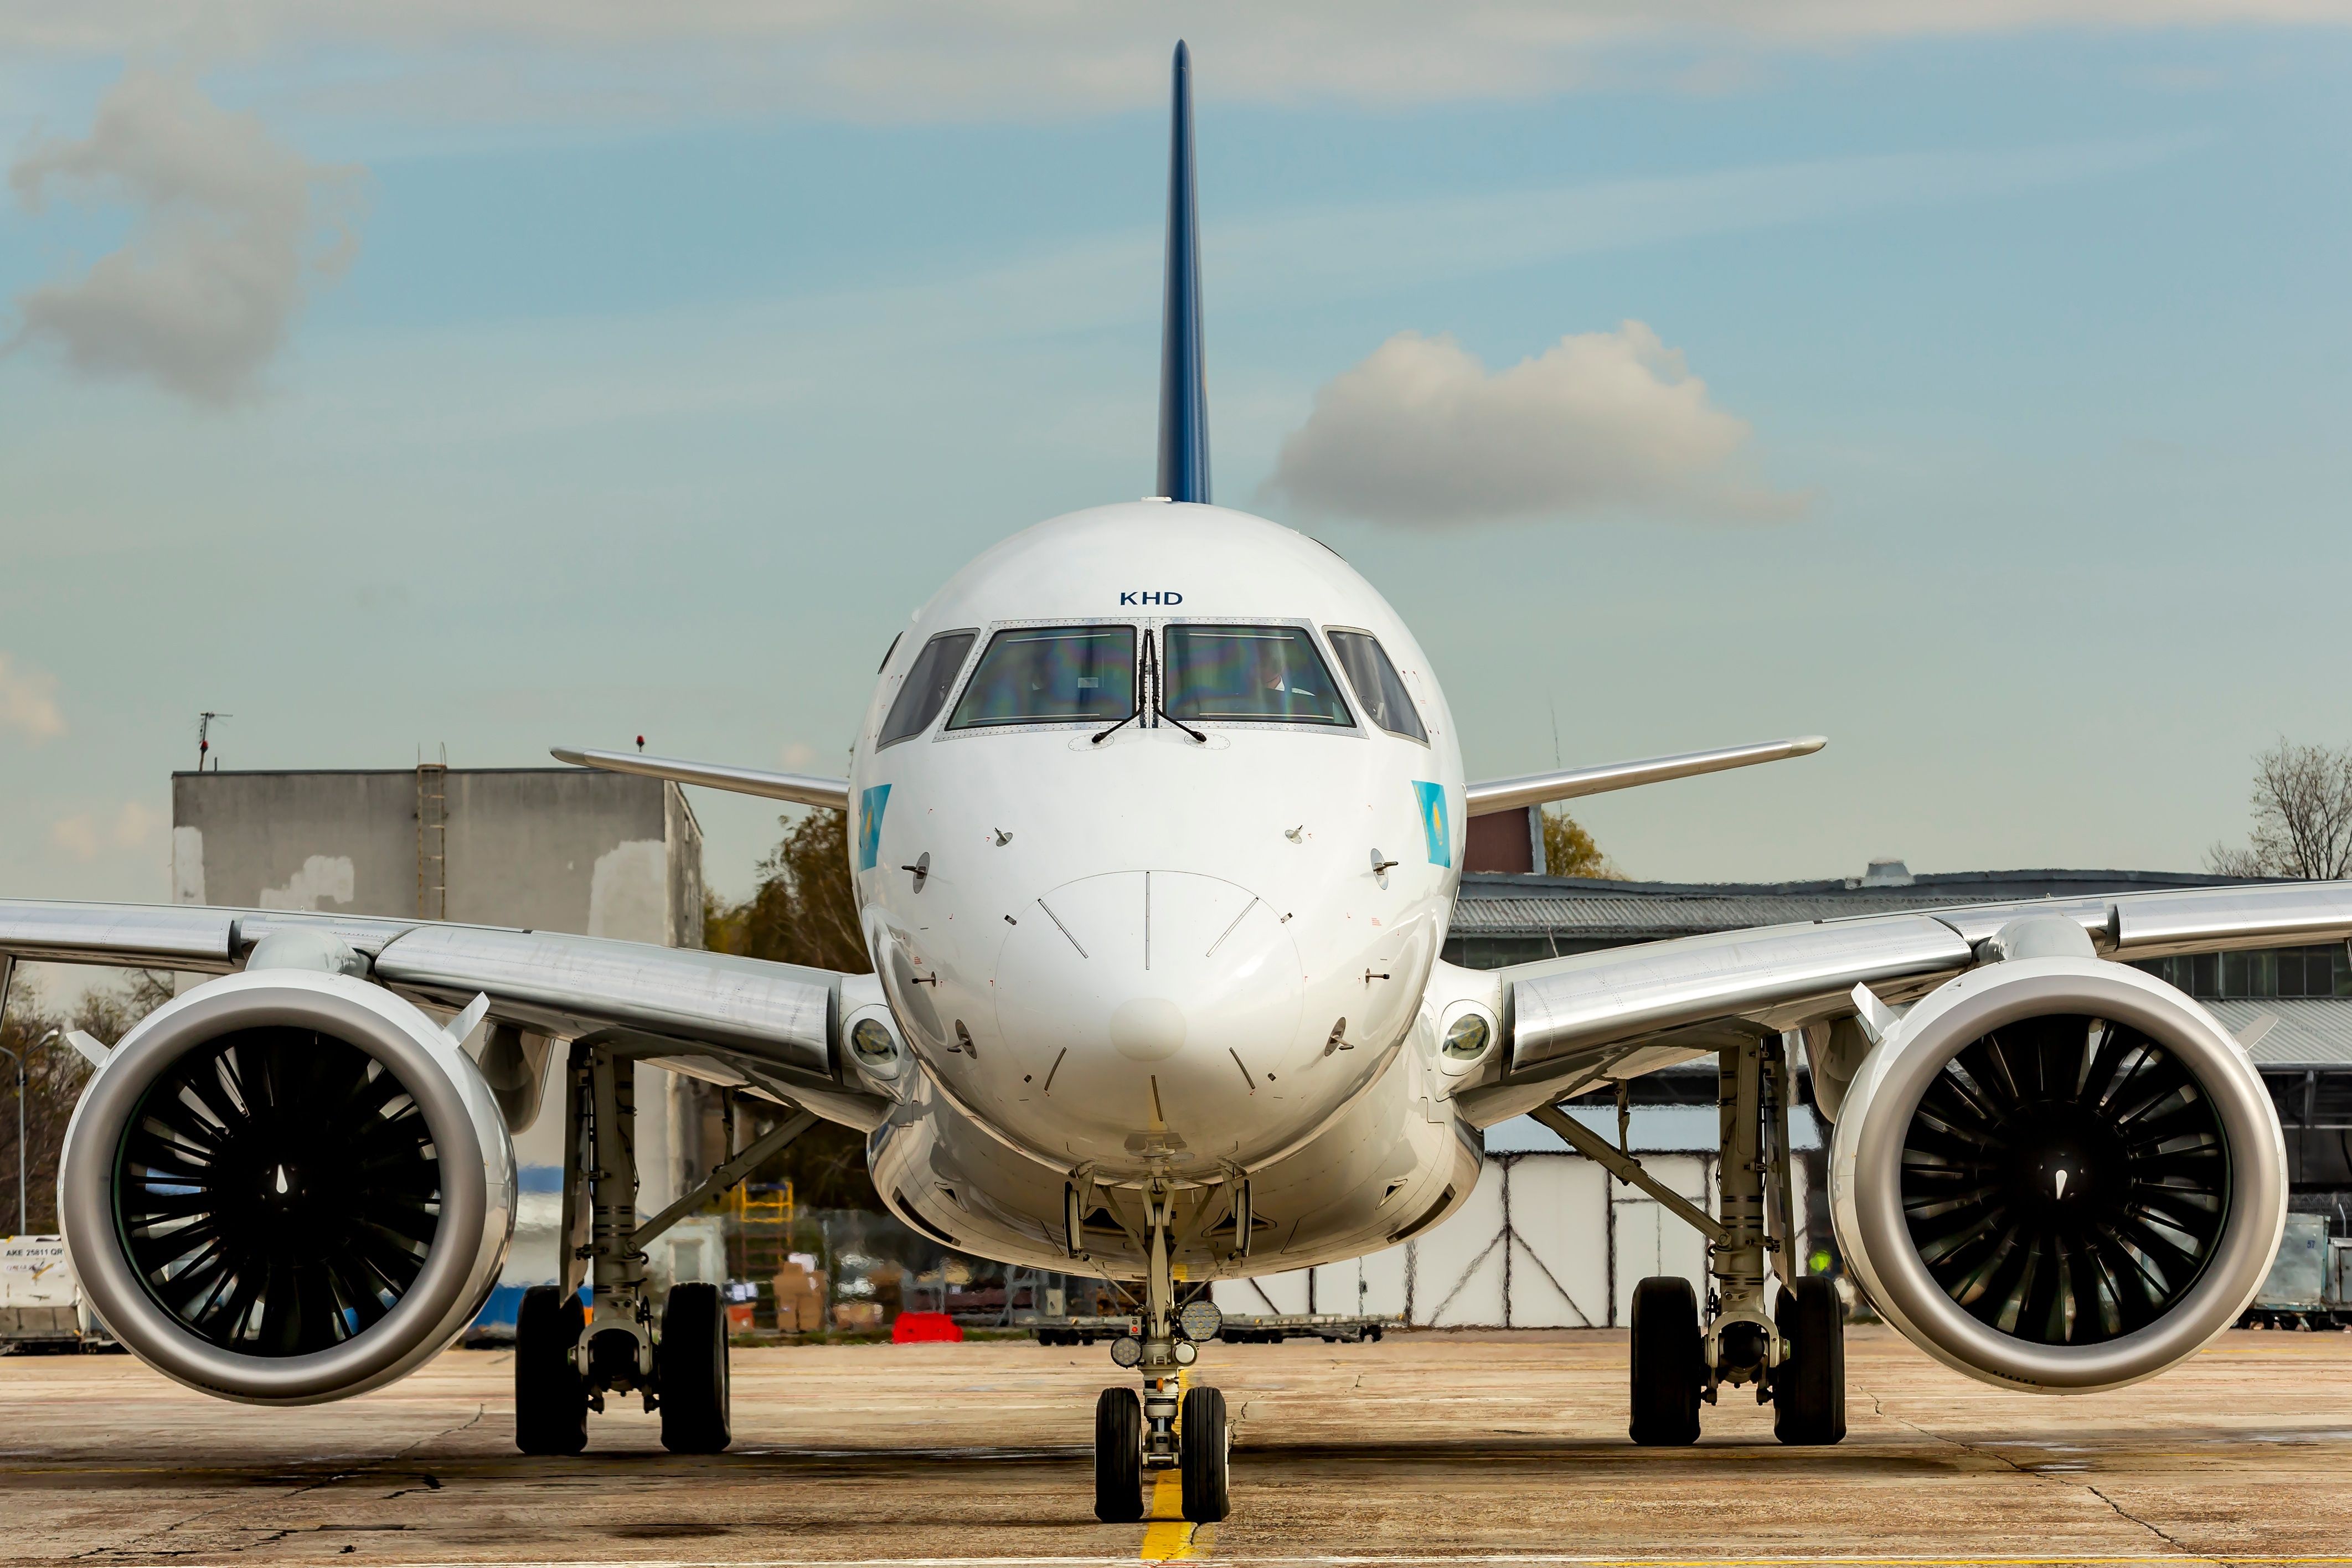 Face-to-face with an Embraer E2 aircraft.